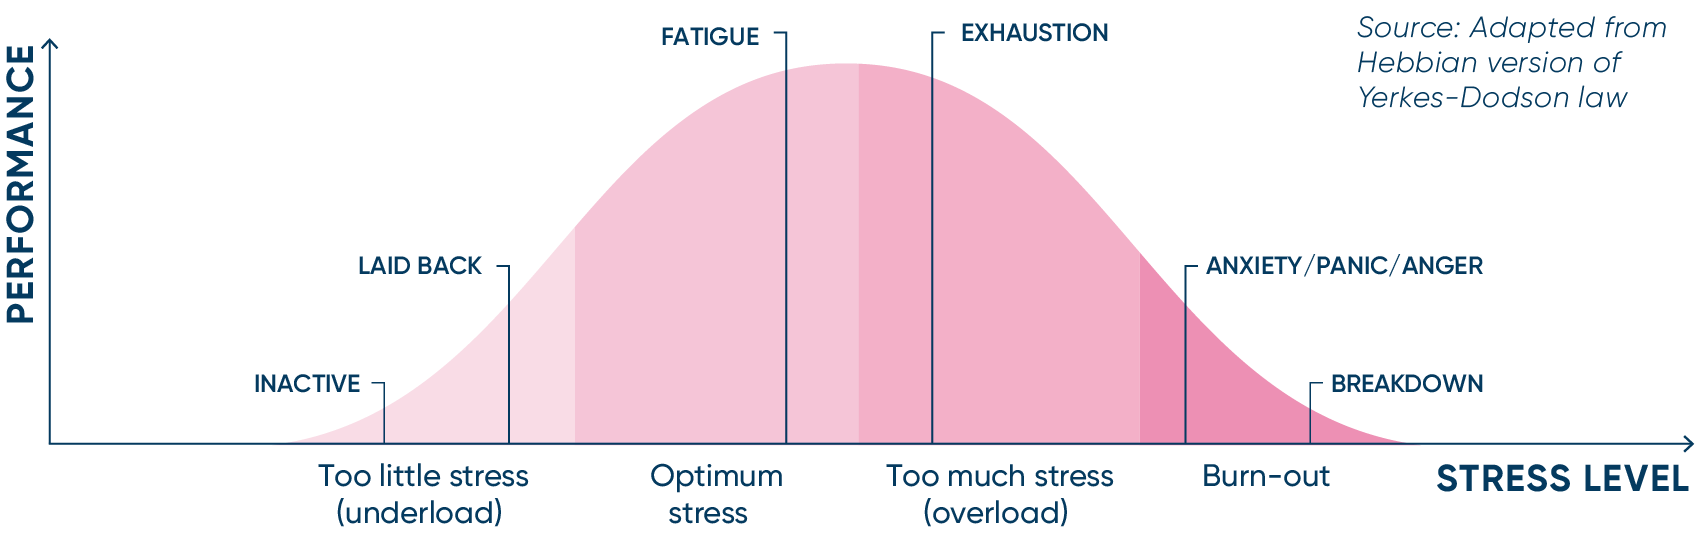 Bell curve graph with performance on the Y axis and stress level on the X axis. On the X axis from left to right: Too little stress (underload, Optimum stress, too much stress (overload), Burn-out. From left to right across the bell curve: Inactive, laid back, Fatigue, Exhaustion, Anxiety/panic/anger, Breakdown.